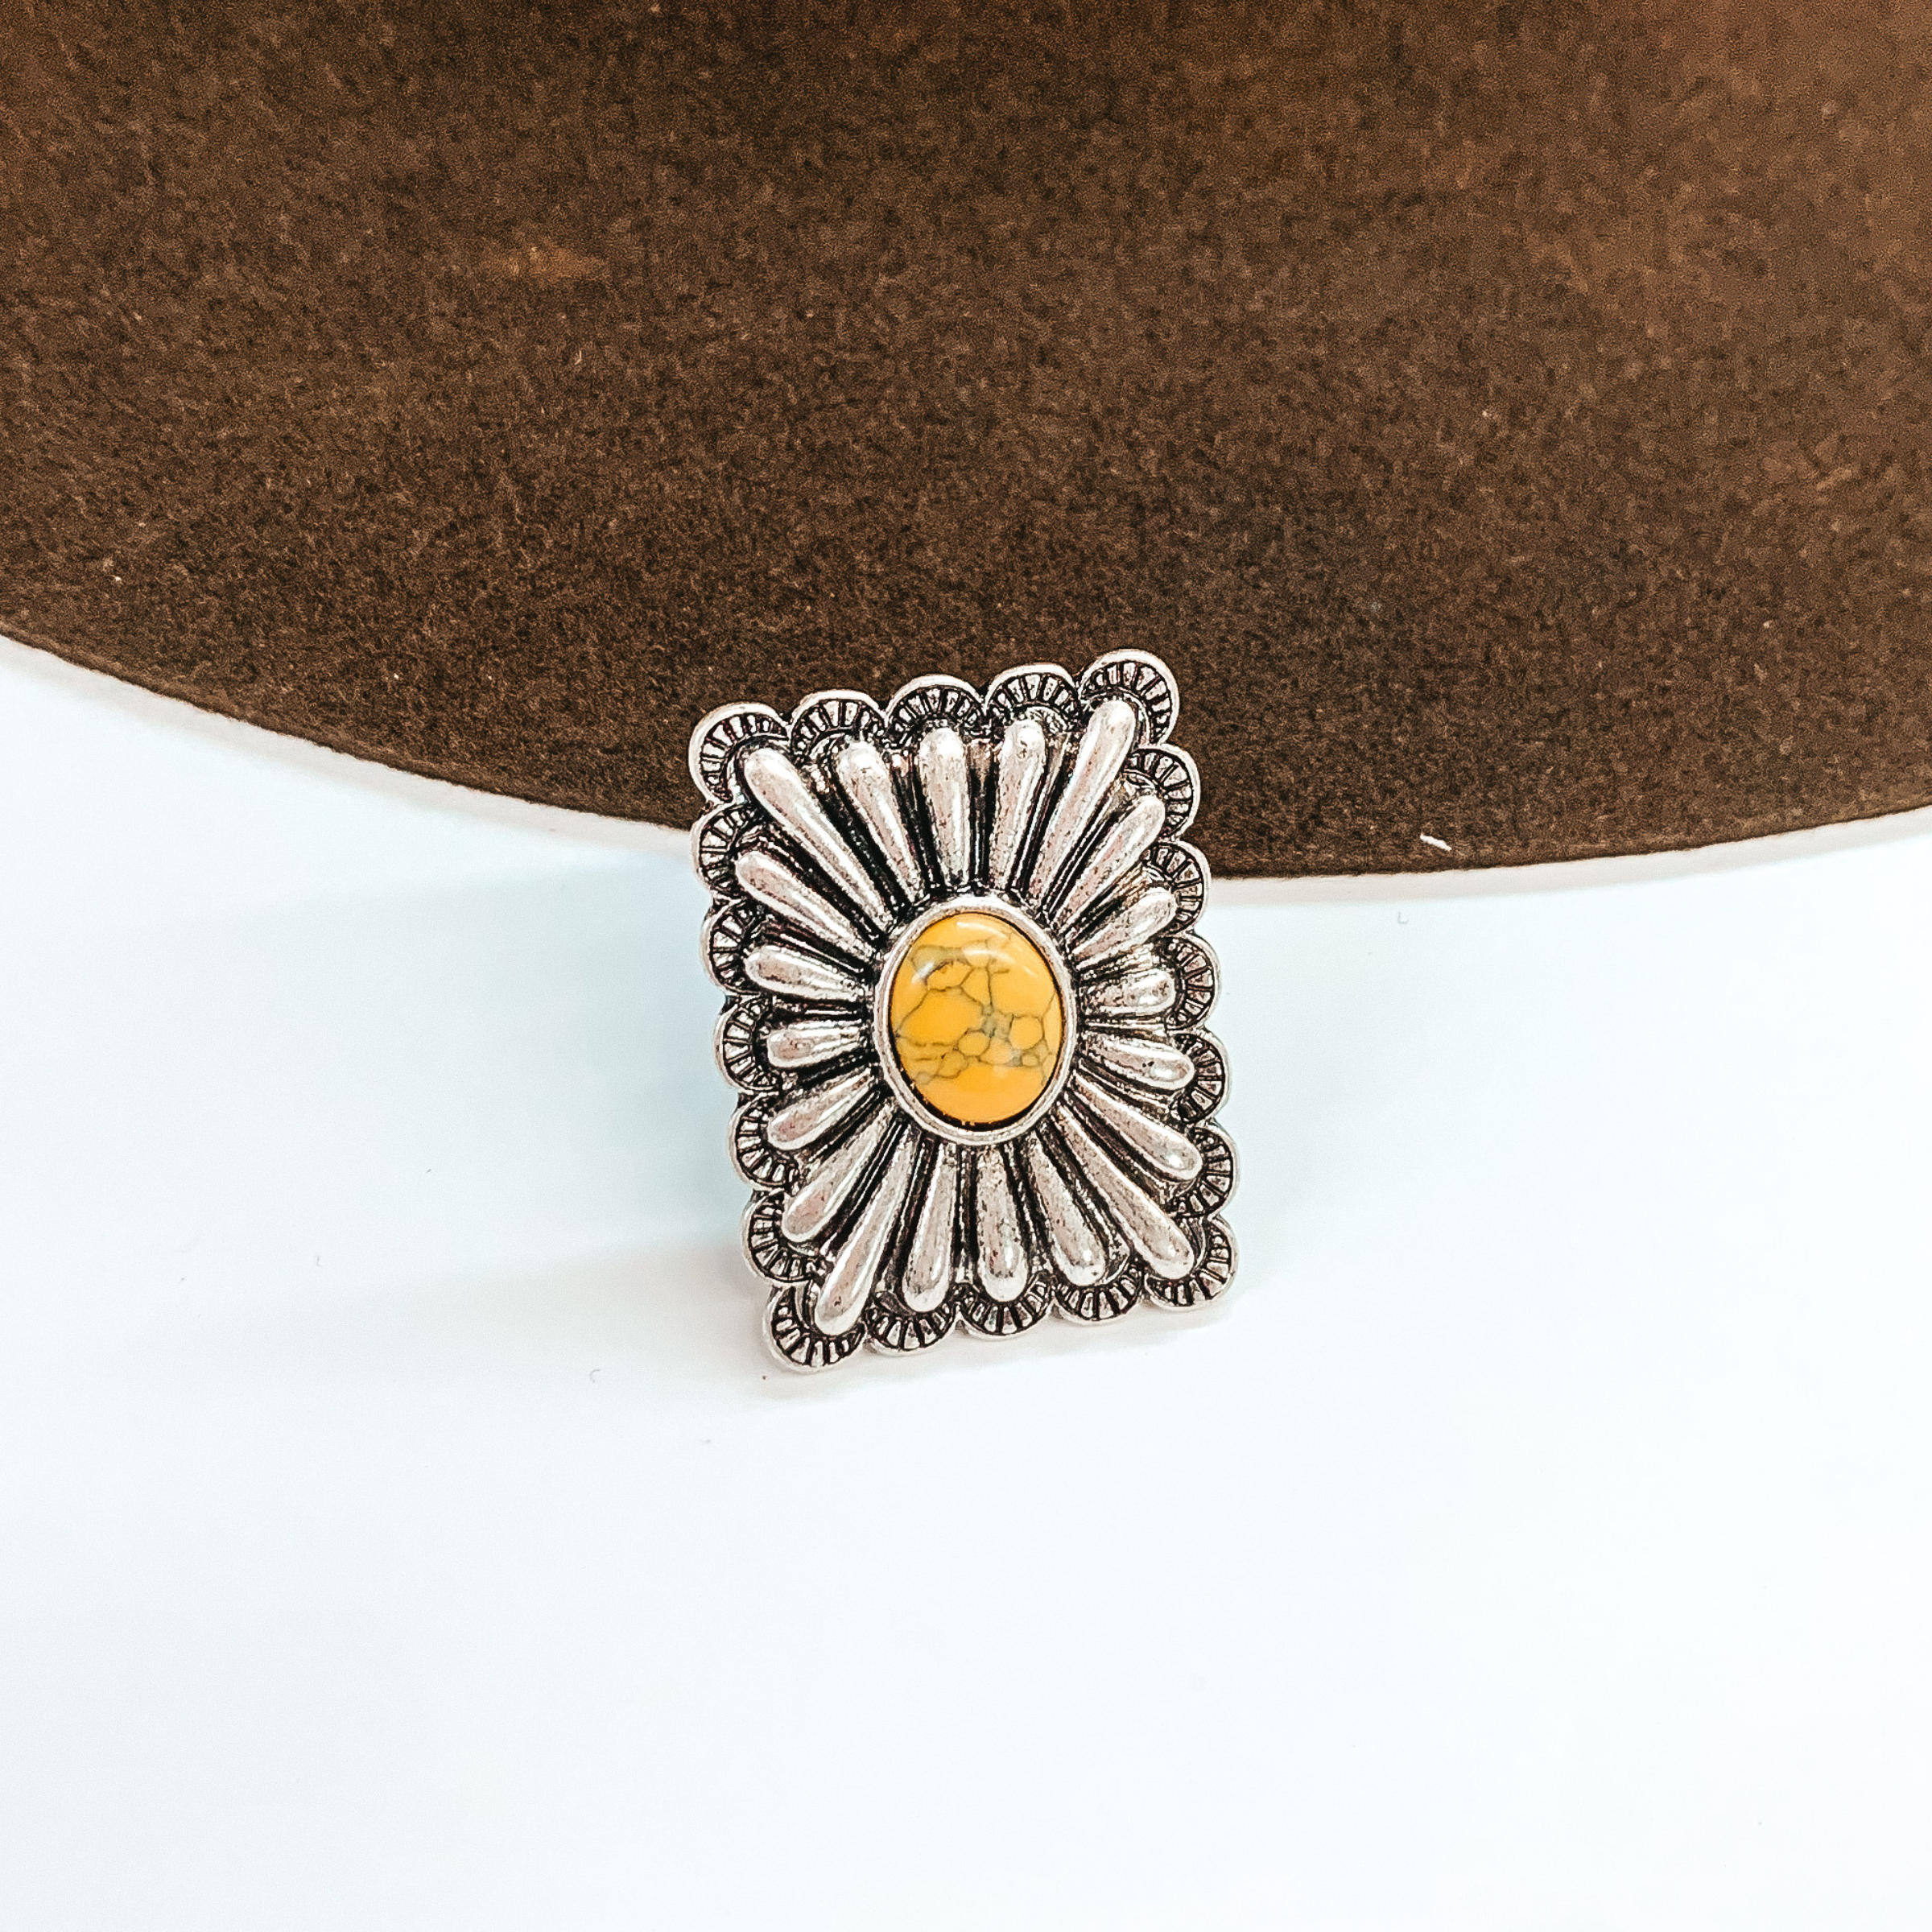 Silver, square concho ring with a center yellow stone. This ring is pictured in front of a brown hat on a white background.